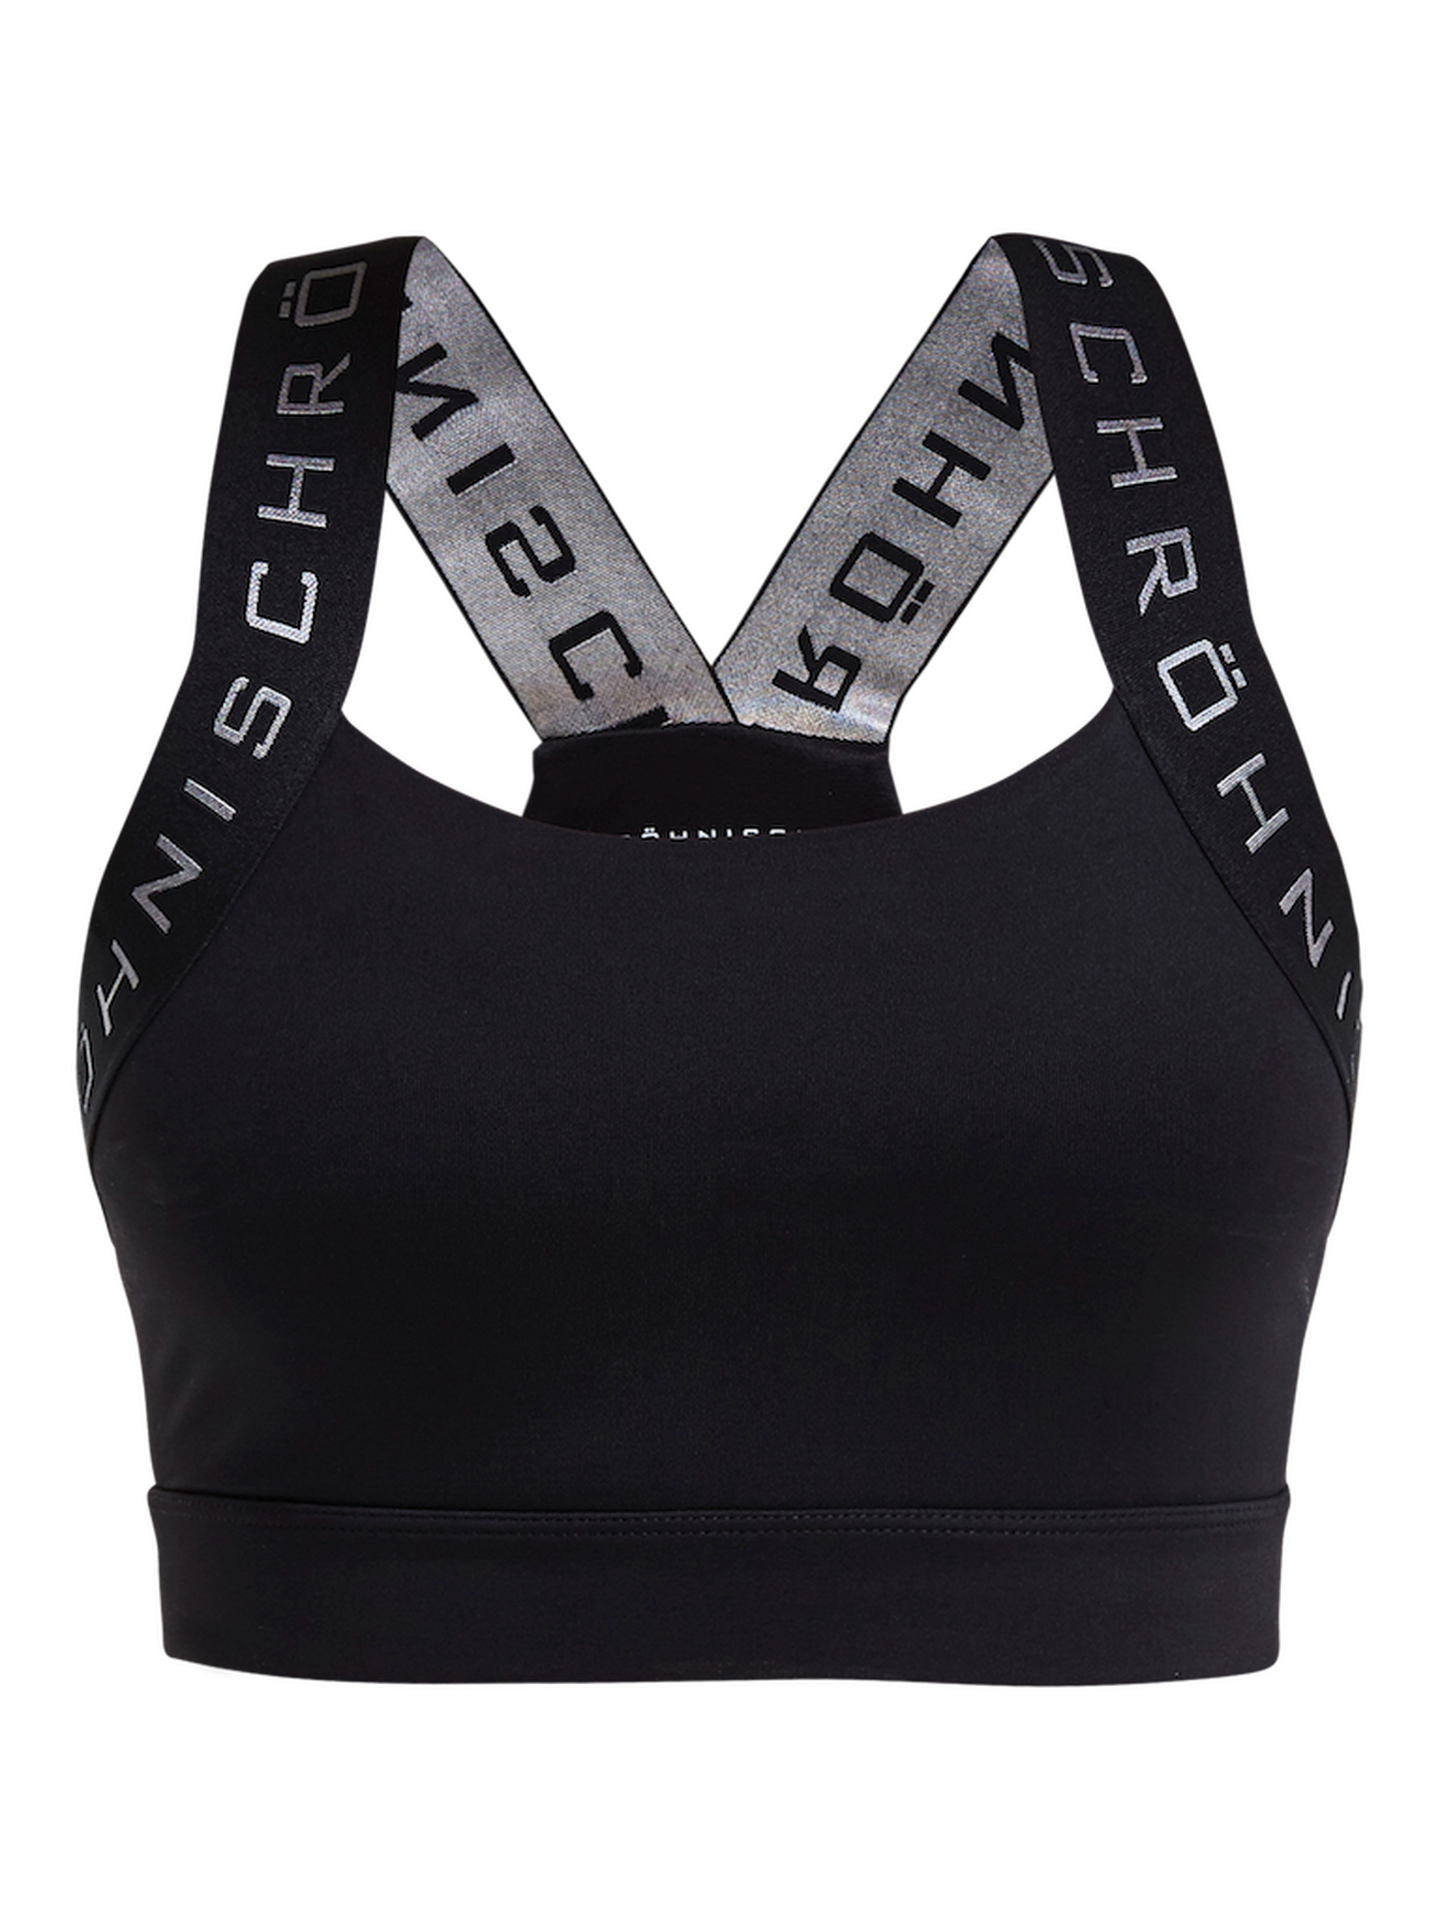 https://www.getinspired.no/globalassets/productimages/rohnisch-kay-sports-bra-black-5ccc42a181d0c.png?ref=2469F1646A